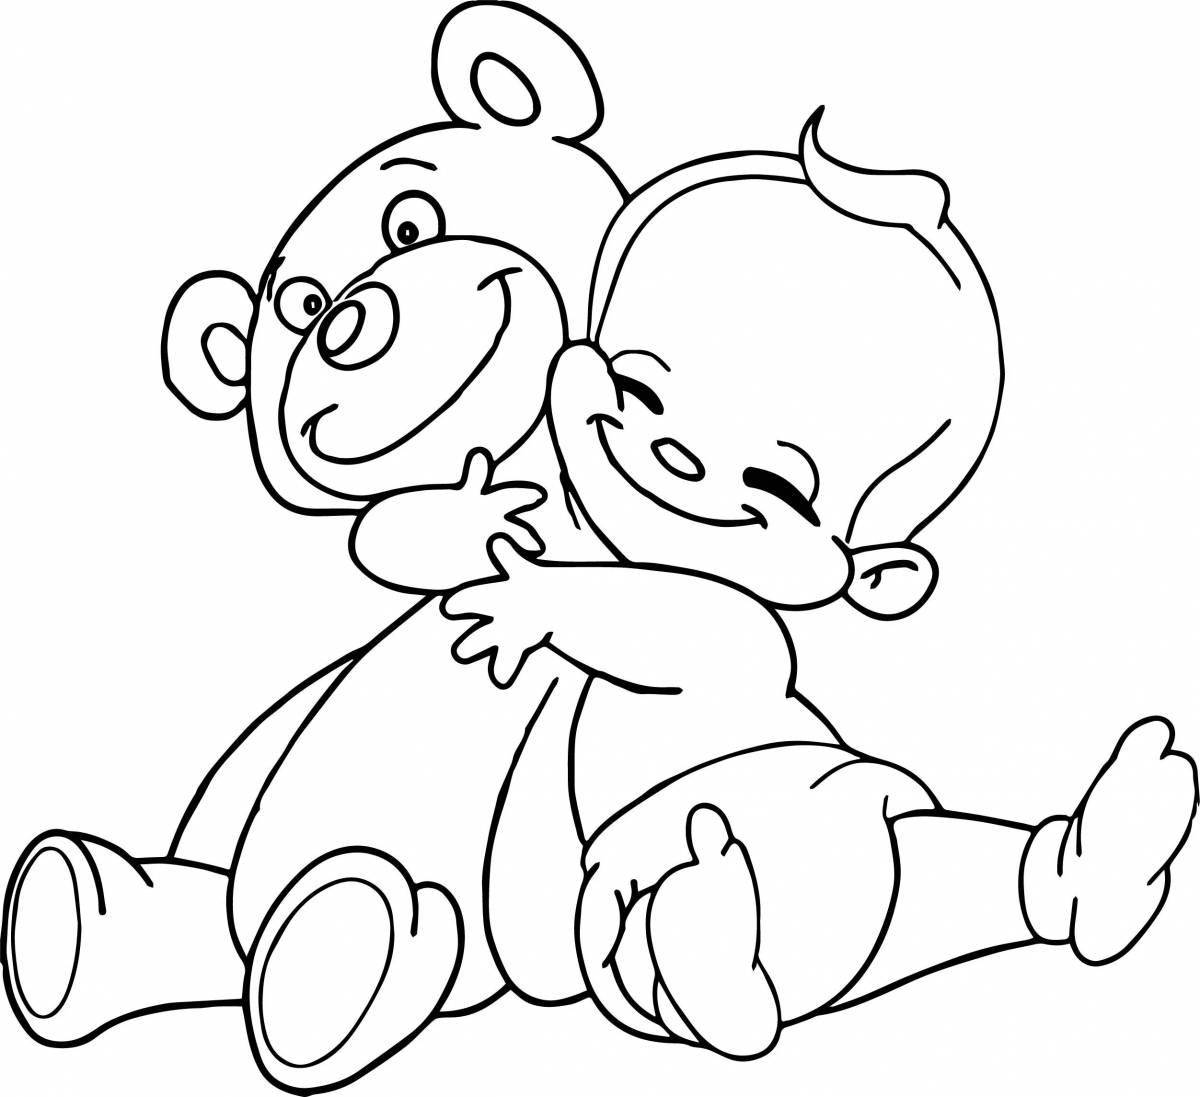 A fun hug day coloring book for kids